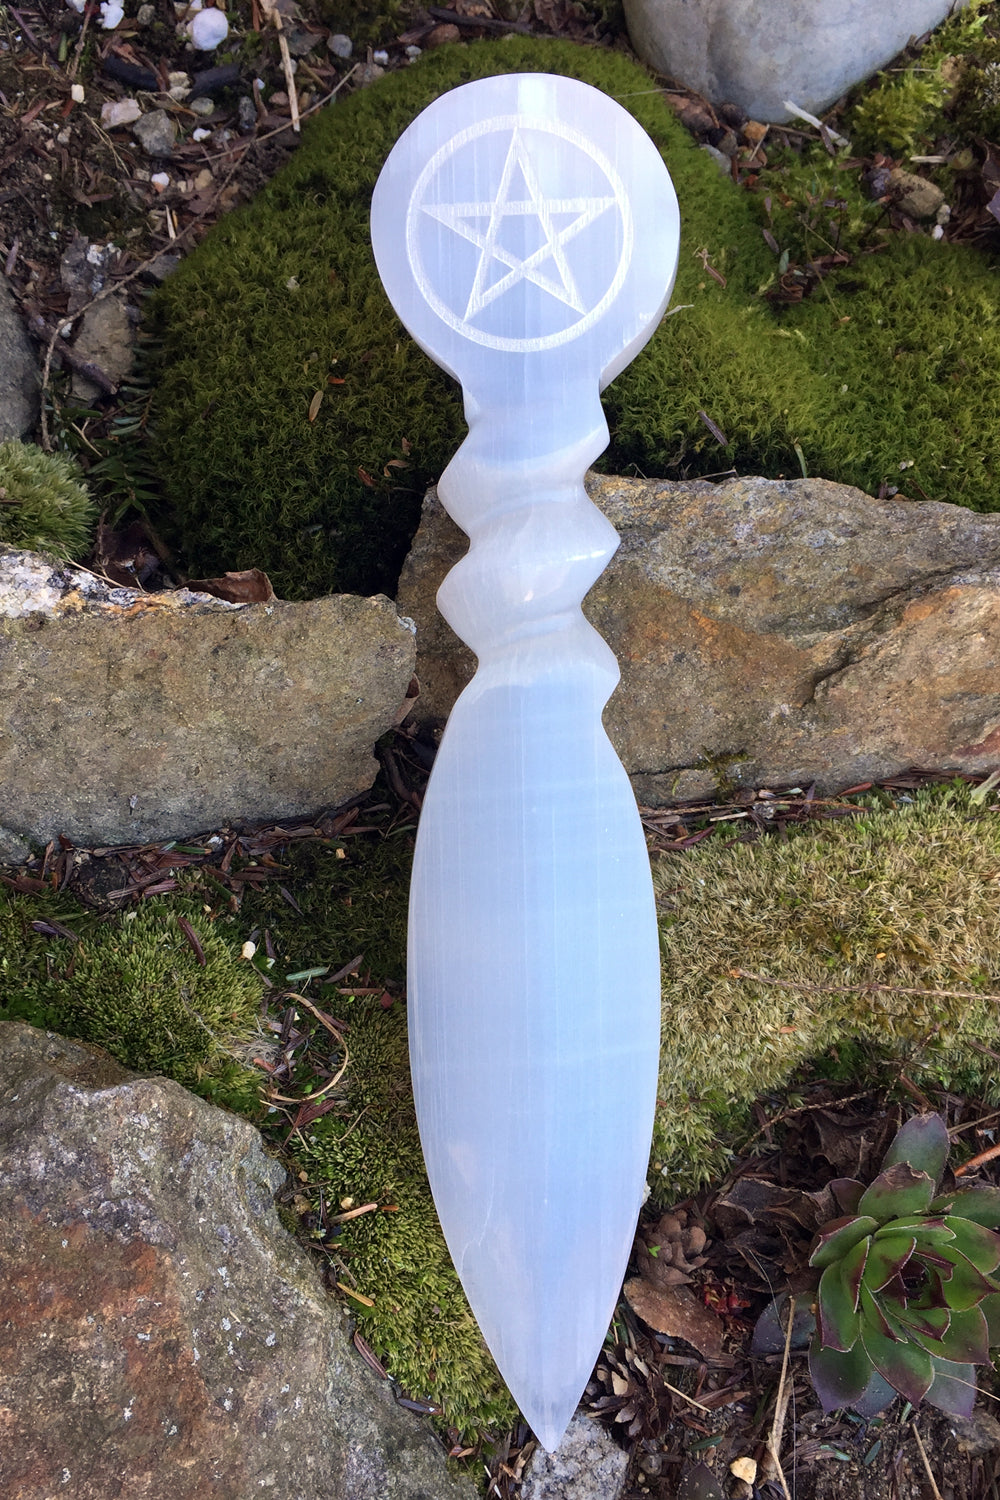 Large Selenite Athame with Pentacle Hilt | Twisted Selenite Wand |Selenite Pentacle Athame Ritual Knife for Directing Energy, Clear Negativity, Cleansing, Spells, Focus, Altar Tool, Meditation